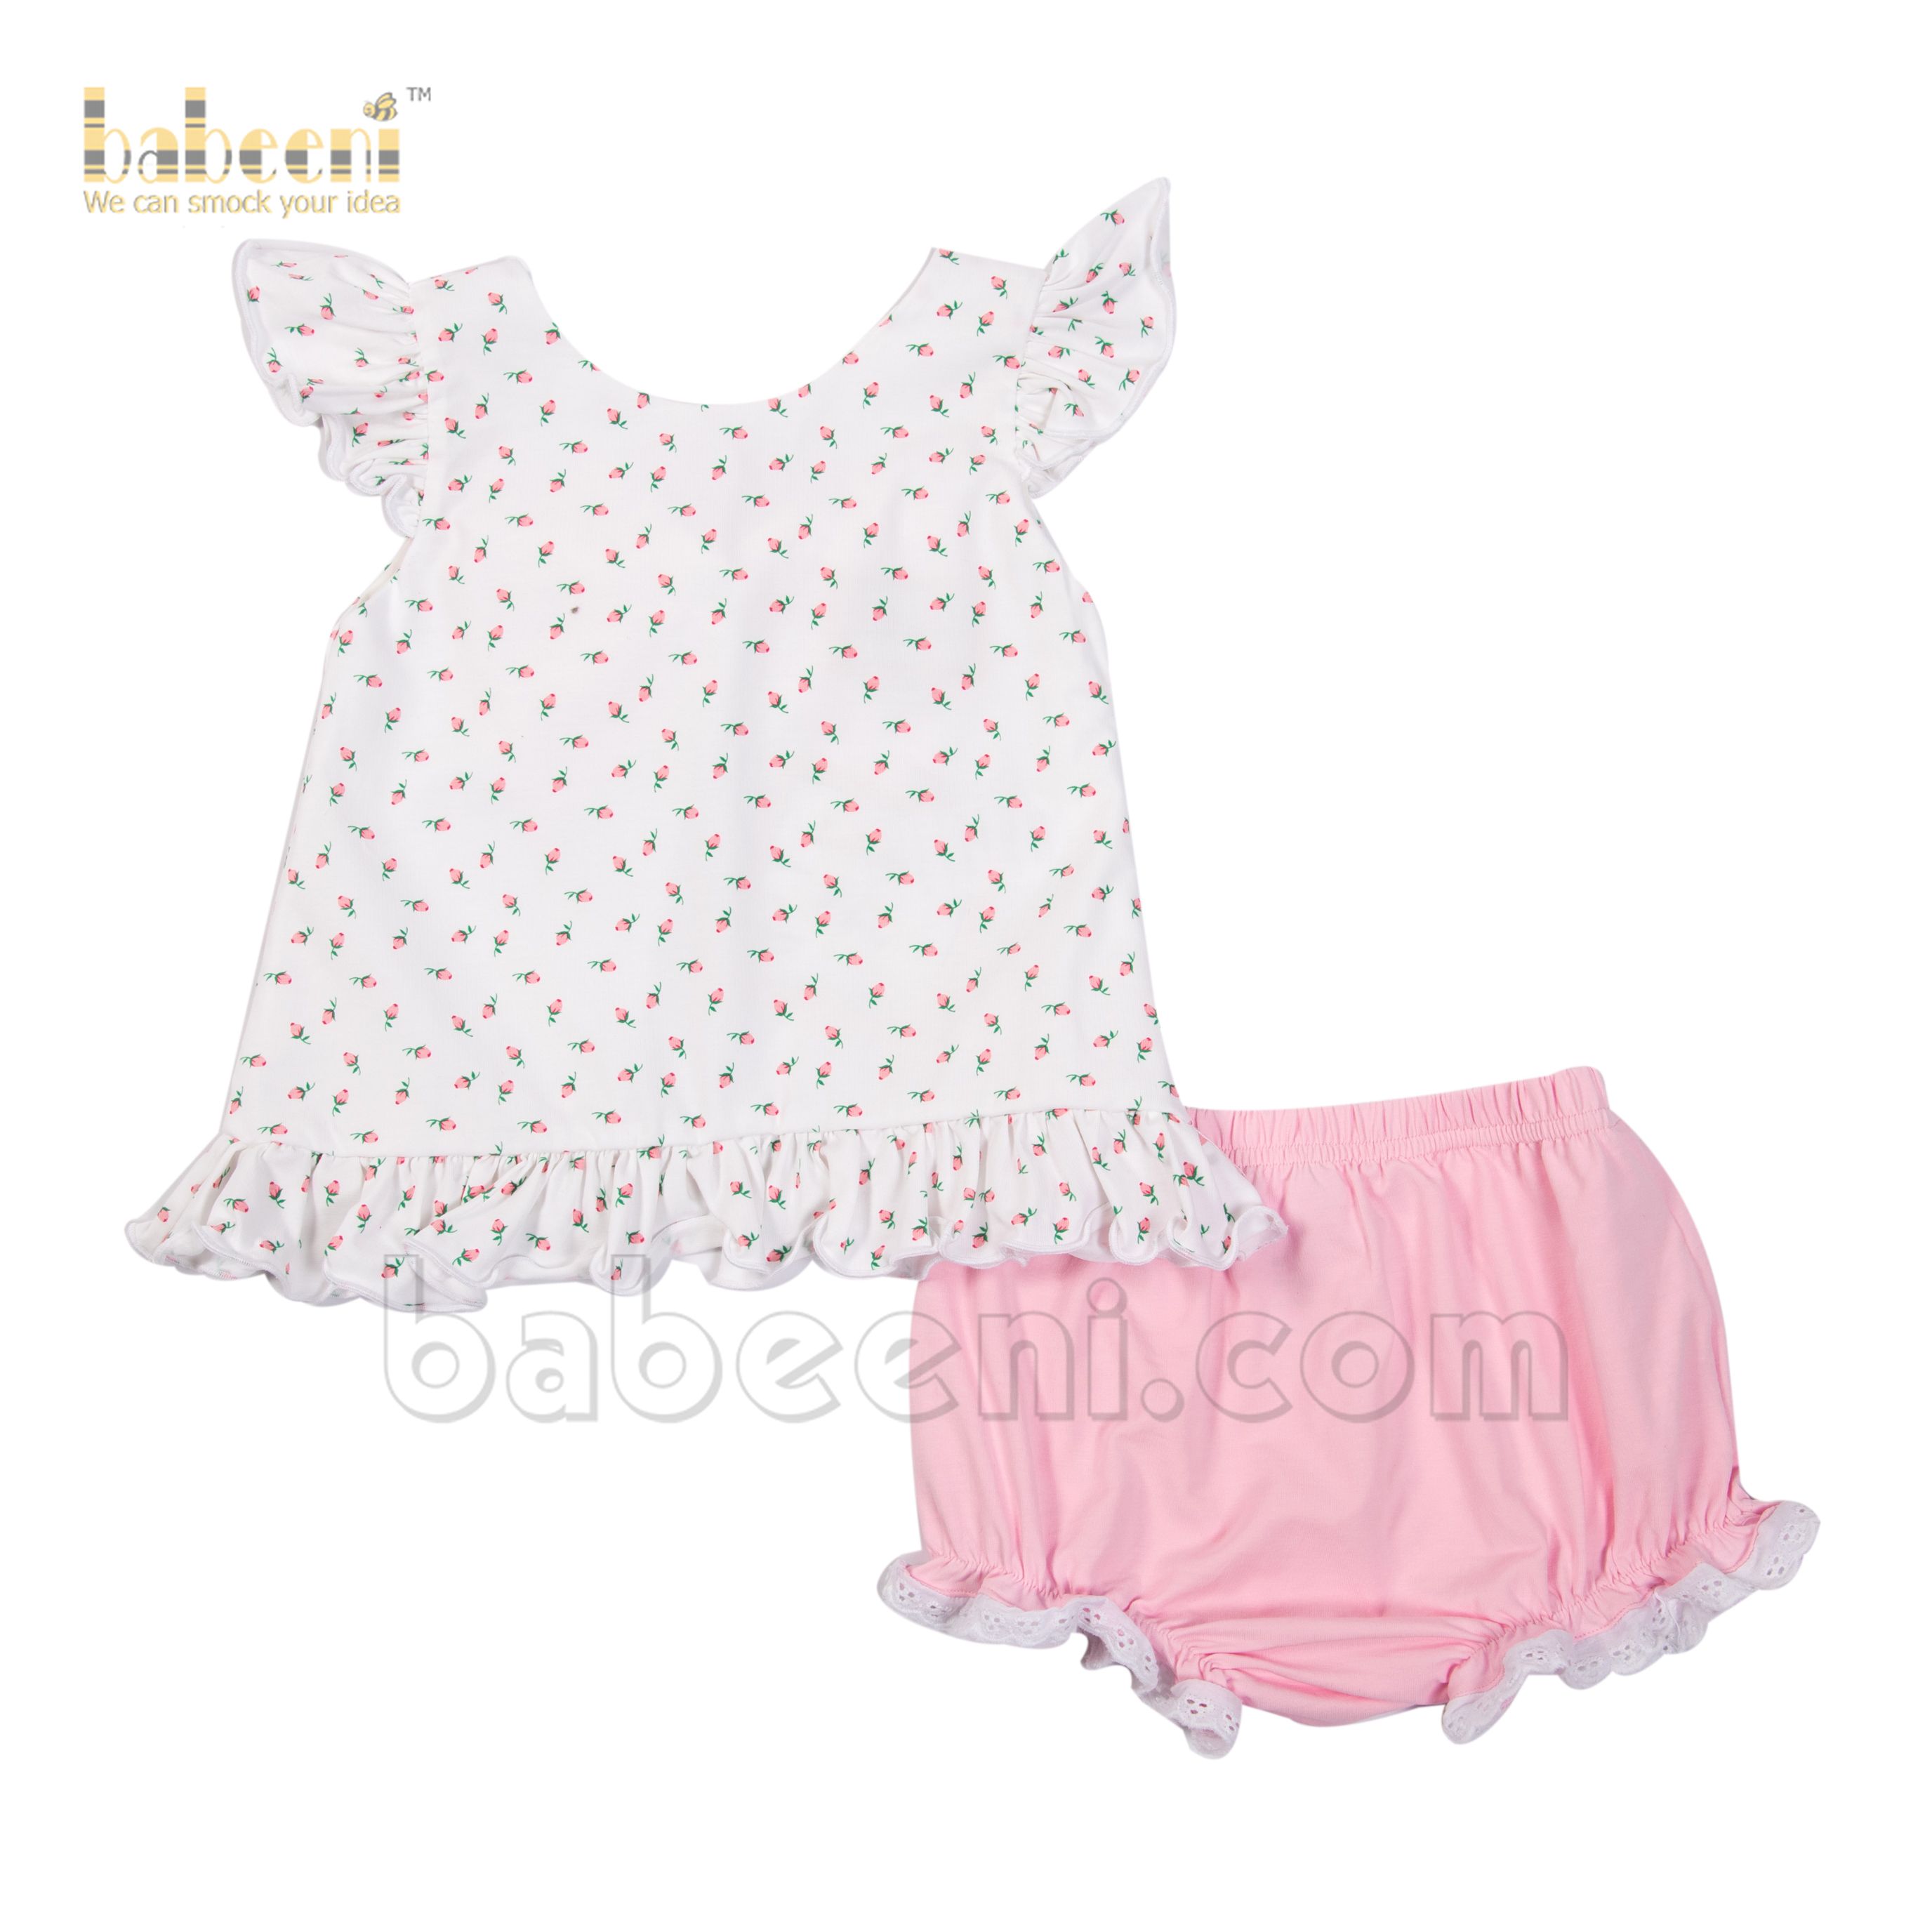 Tiny rose embroidered girl set - DR 3096